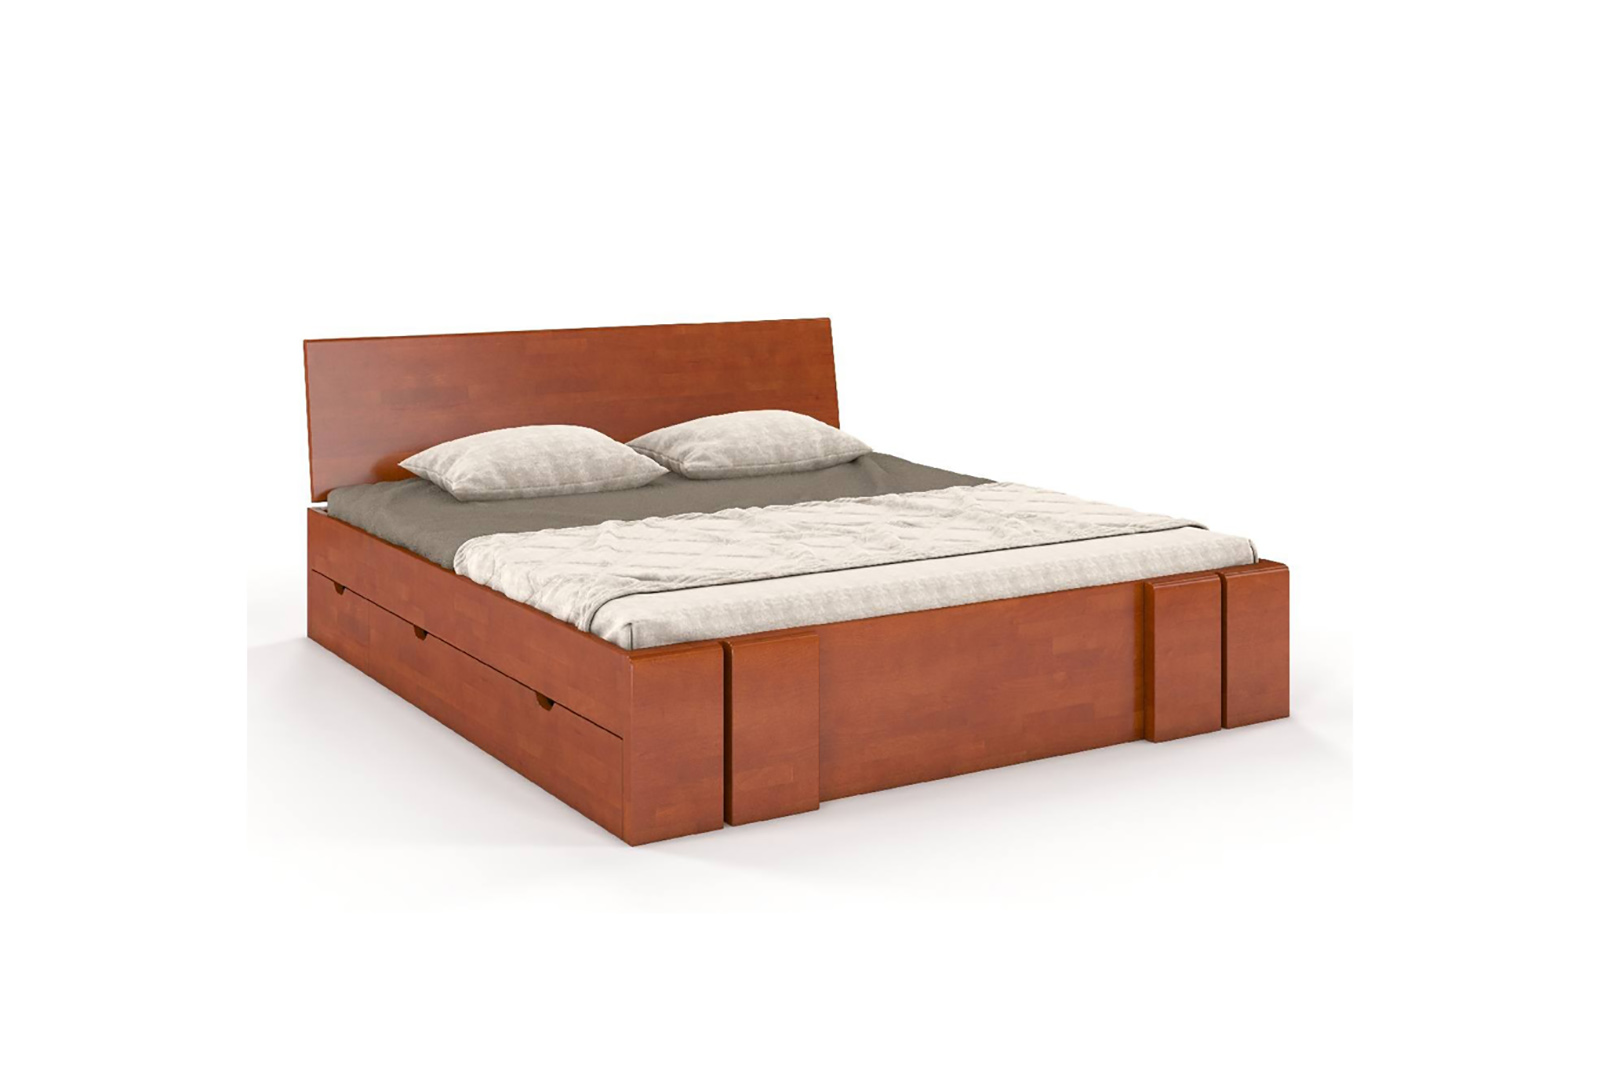 WOODEN BEECH BED WITH DRAWERS SKANDICA VESTRE MAXI AND DR 2